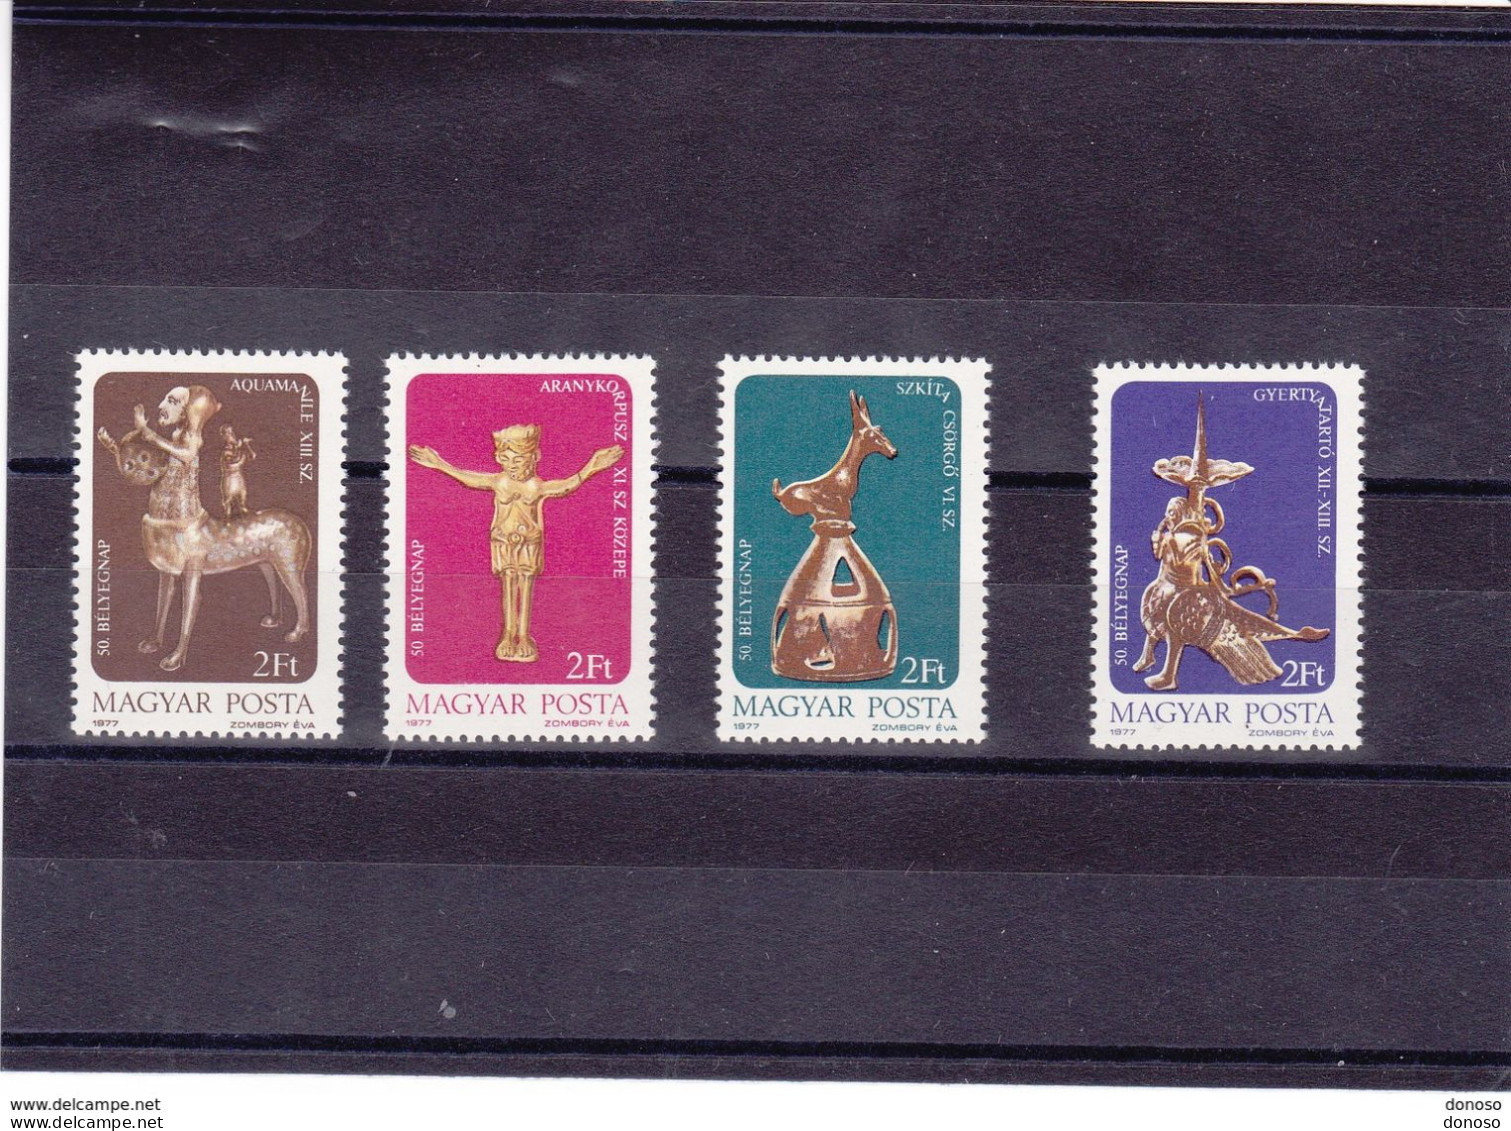 HONGRIE 1977 JOURNEE DU TIMBRE Yvert 2572-2575, Michel 3209-3212 NEUF** MNH Cote 6 Euros - Unused Stamps